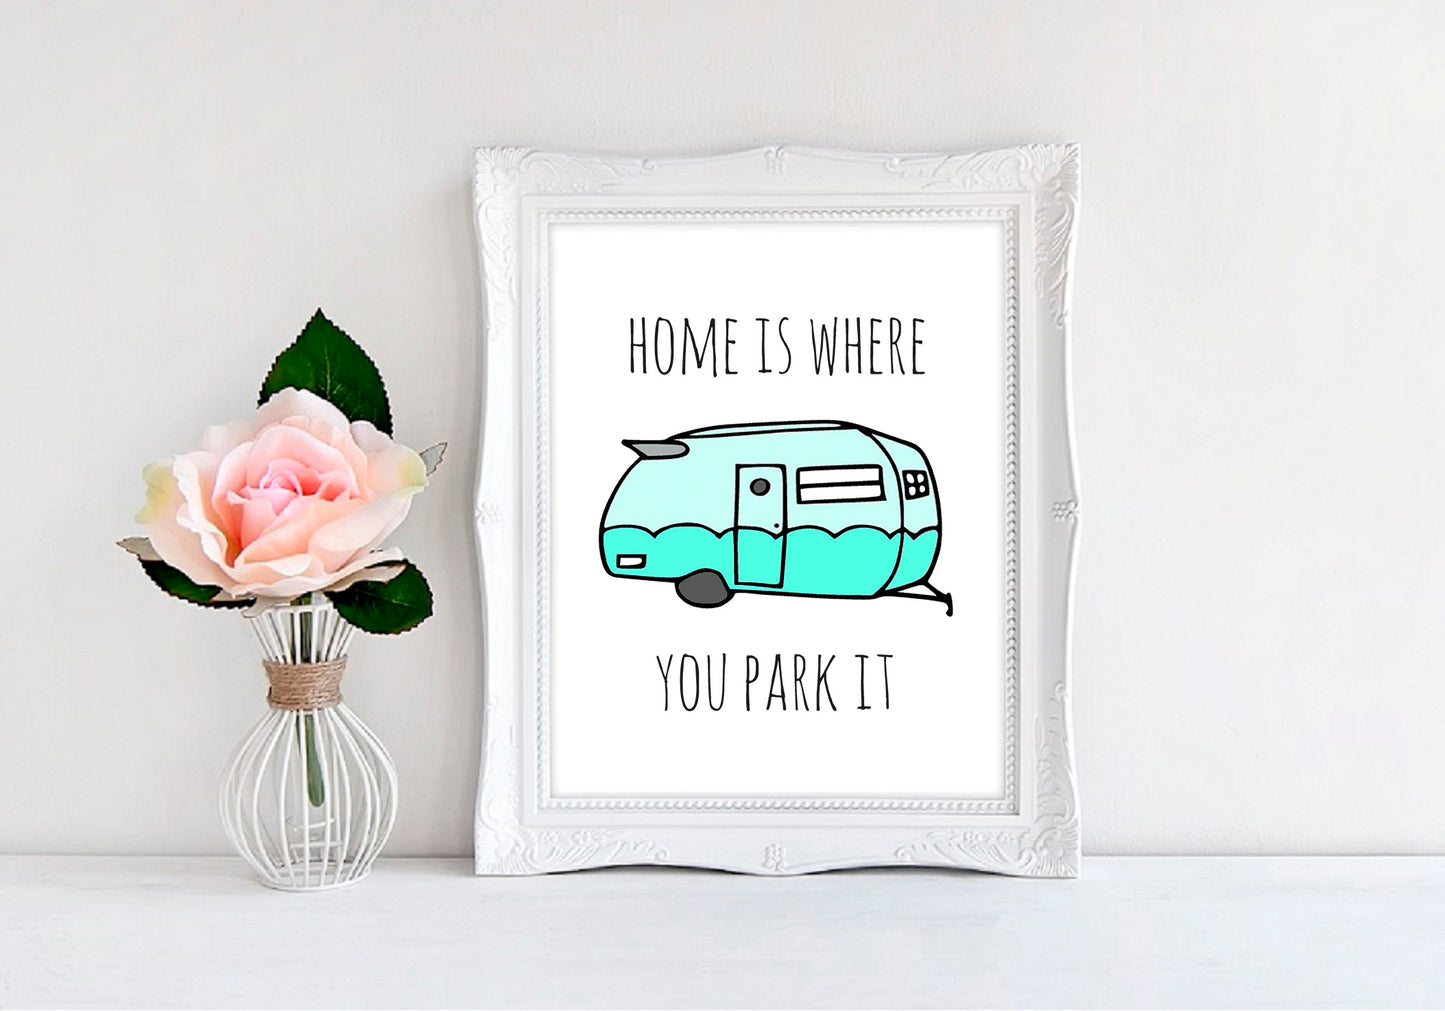 Home Is Where You Park It - 8"x10" Wall Print - MoonlightMakers